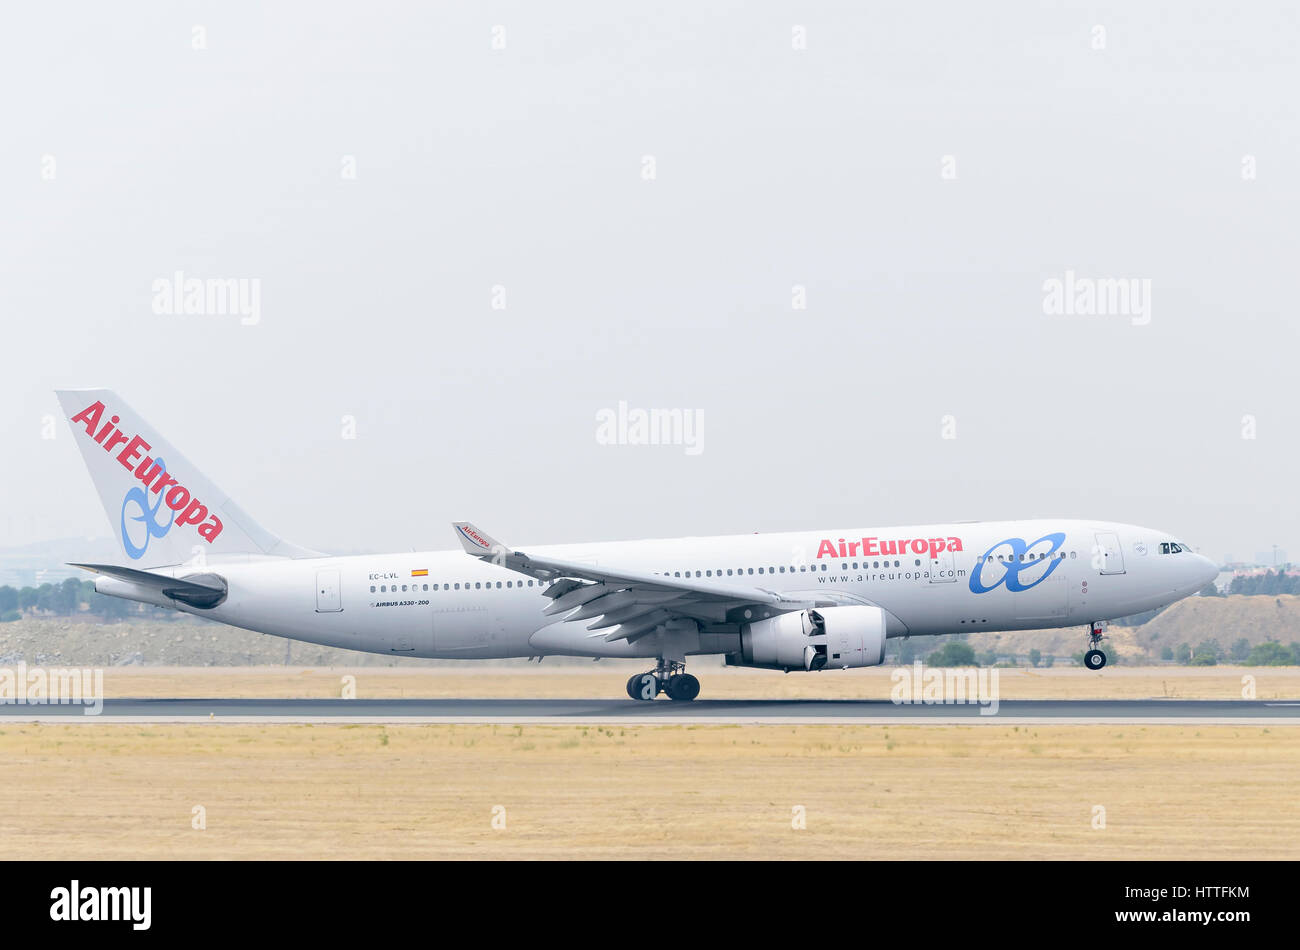 Plane Airbus A330, of Air Europa airline, is landing on Madrid - Barajas, Adolfo Suarez airport. Cloudy and hot day of summer. Stock Photo